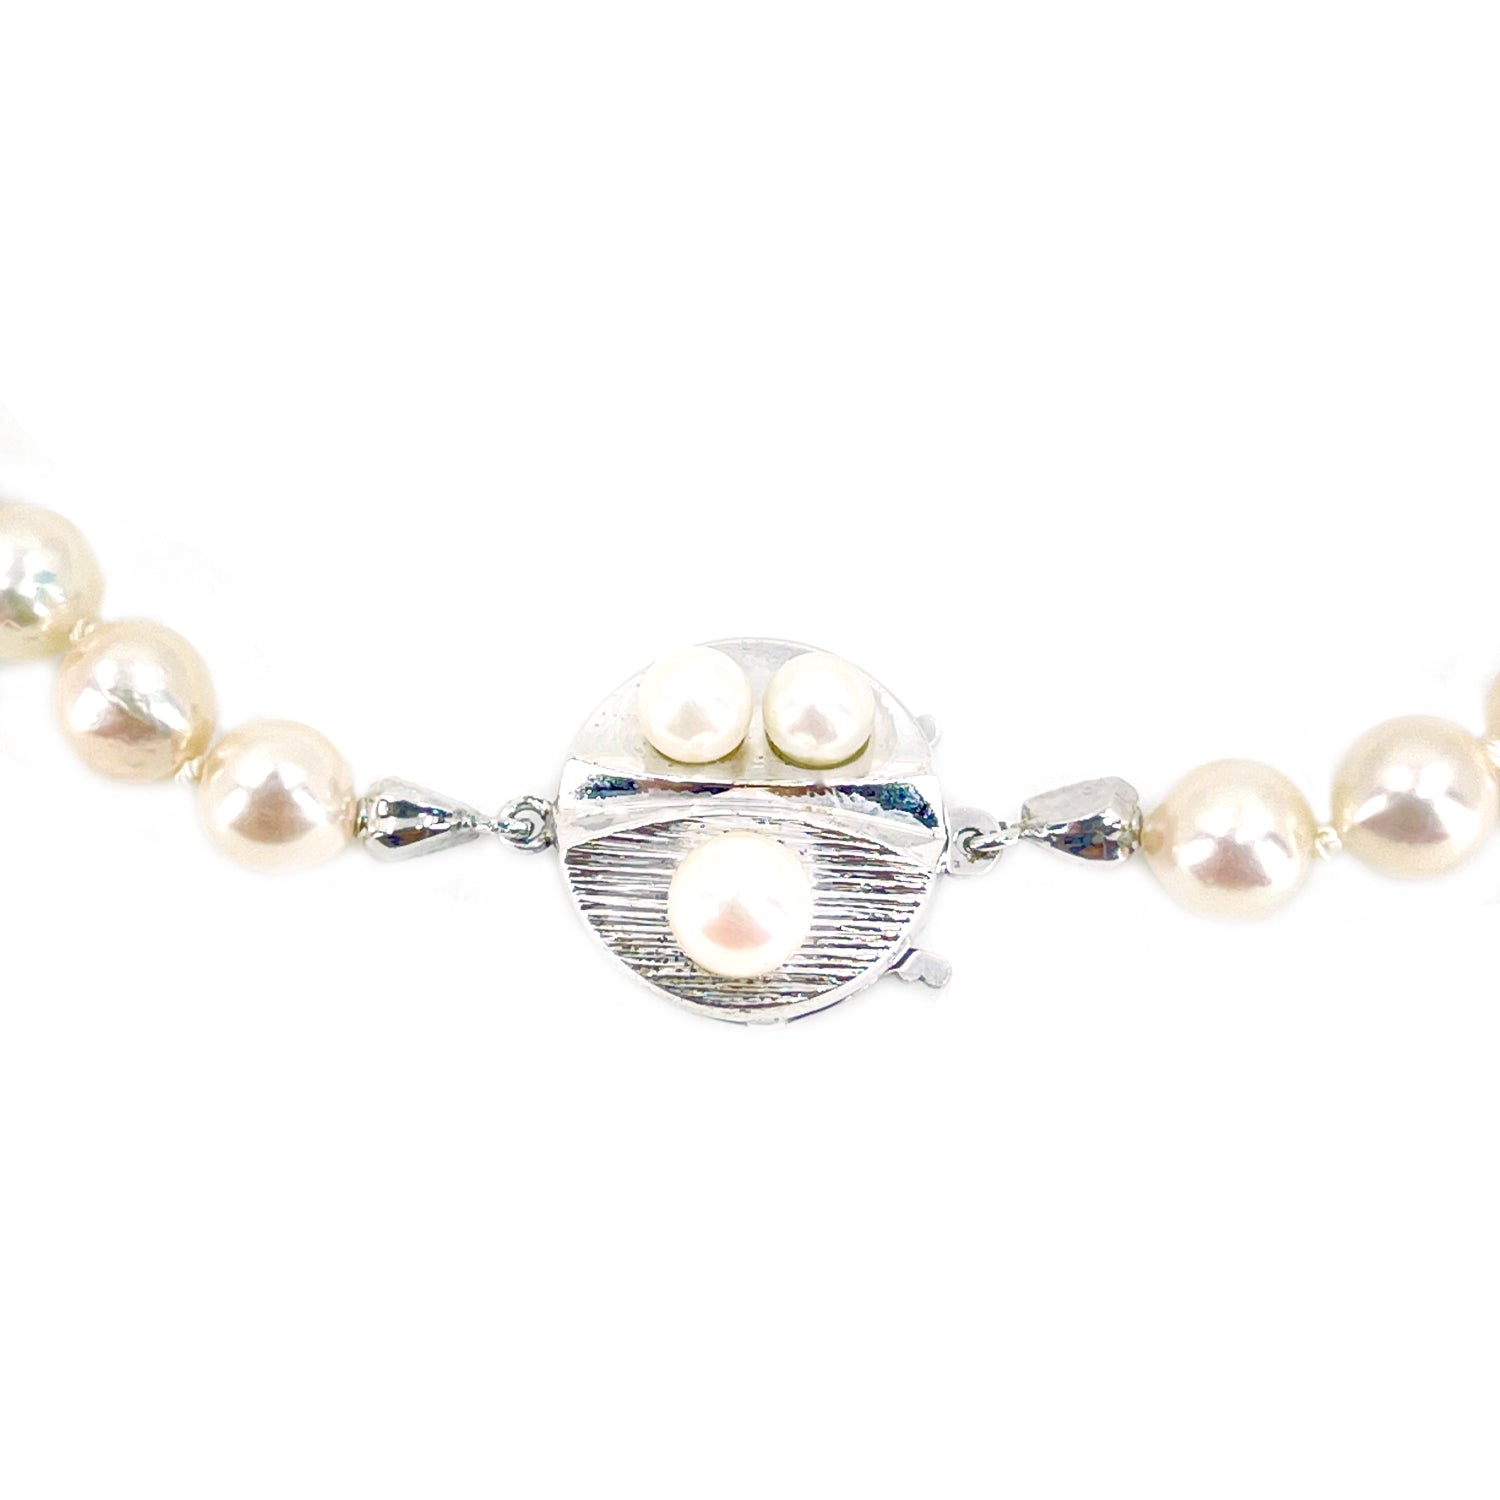 Modernist Retro Japanese Saltwater Cultured Akoya Baroque Pearl Necklace - Coin Silver 24.50 Inch